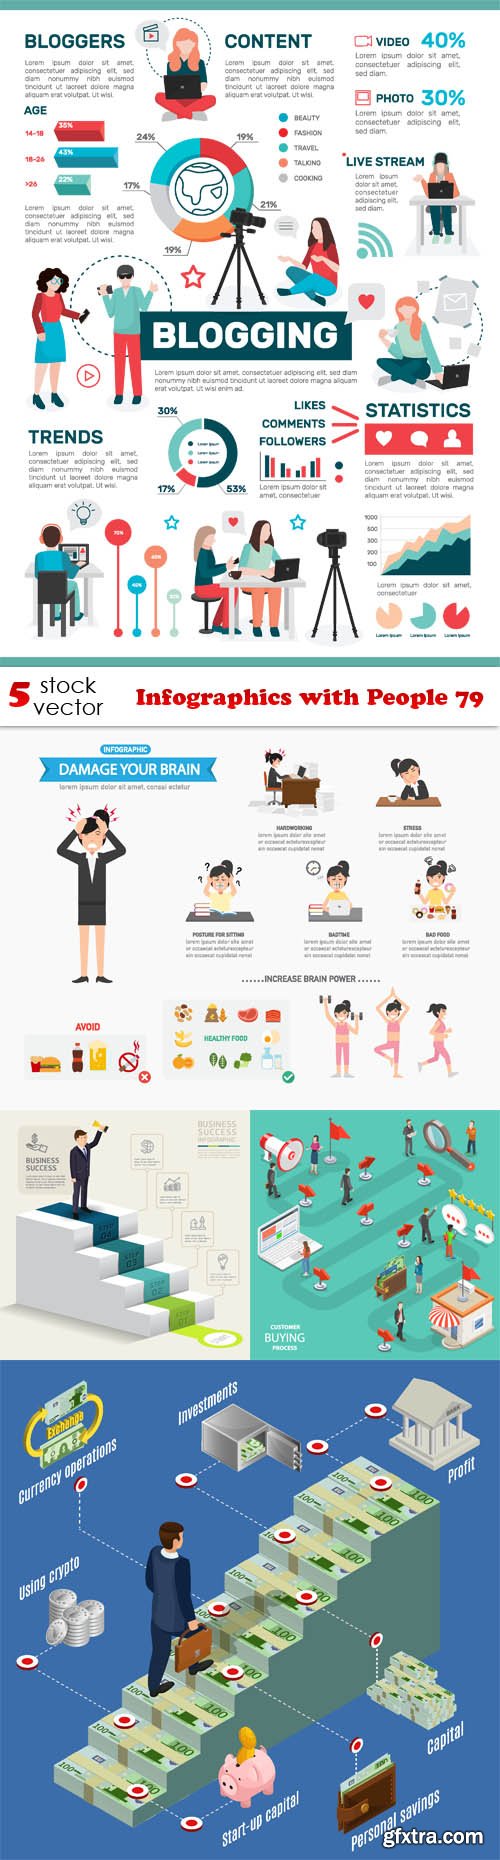 Vectors - Infographics with People 79